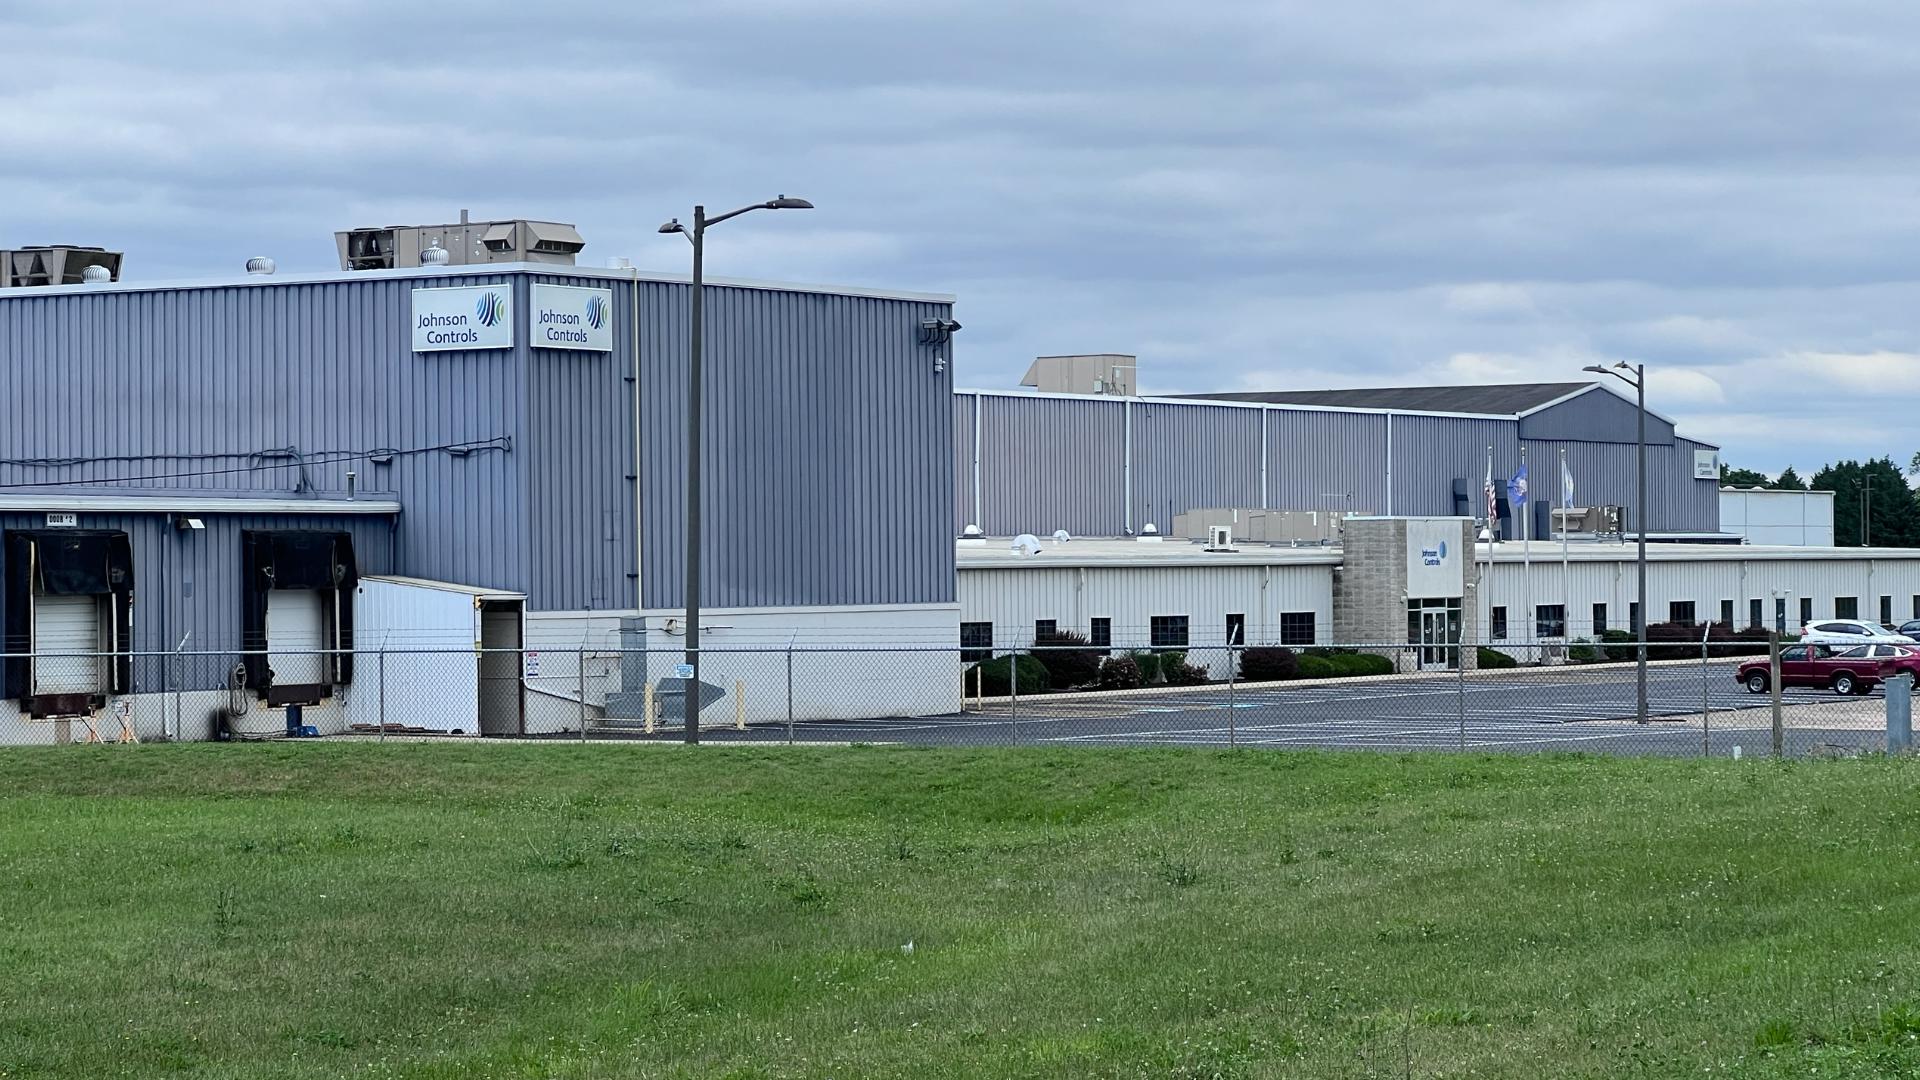 Three people were transported to the hospital after suffering injuries during a reported explosion at Johnson Controls in Waynesboro.